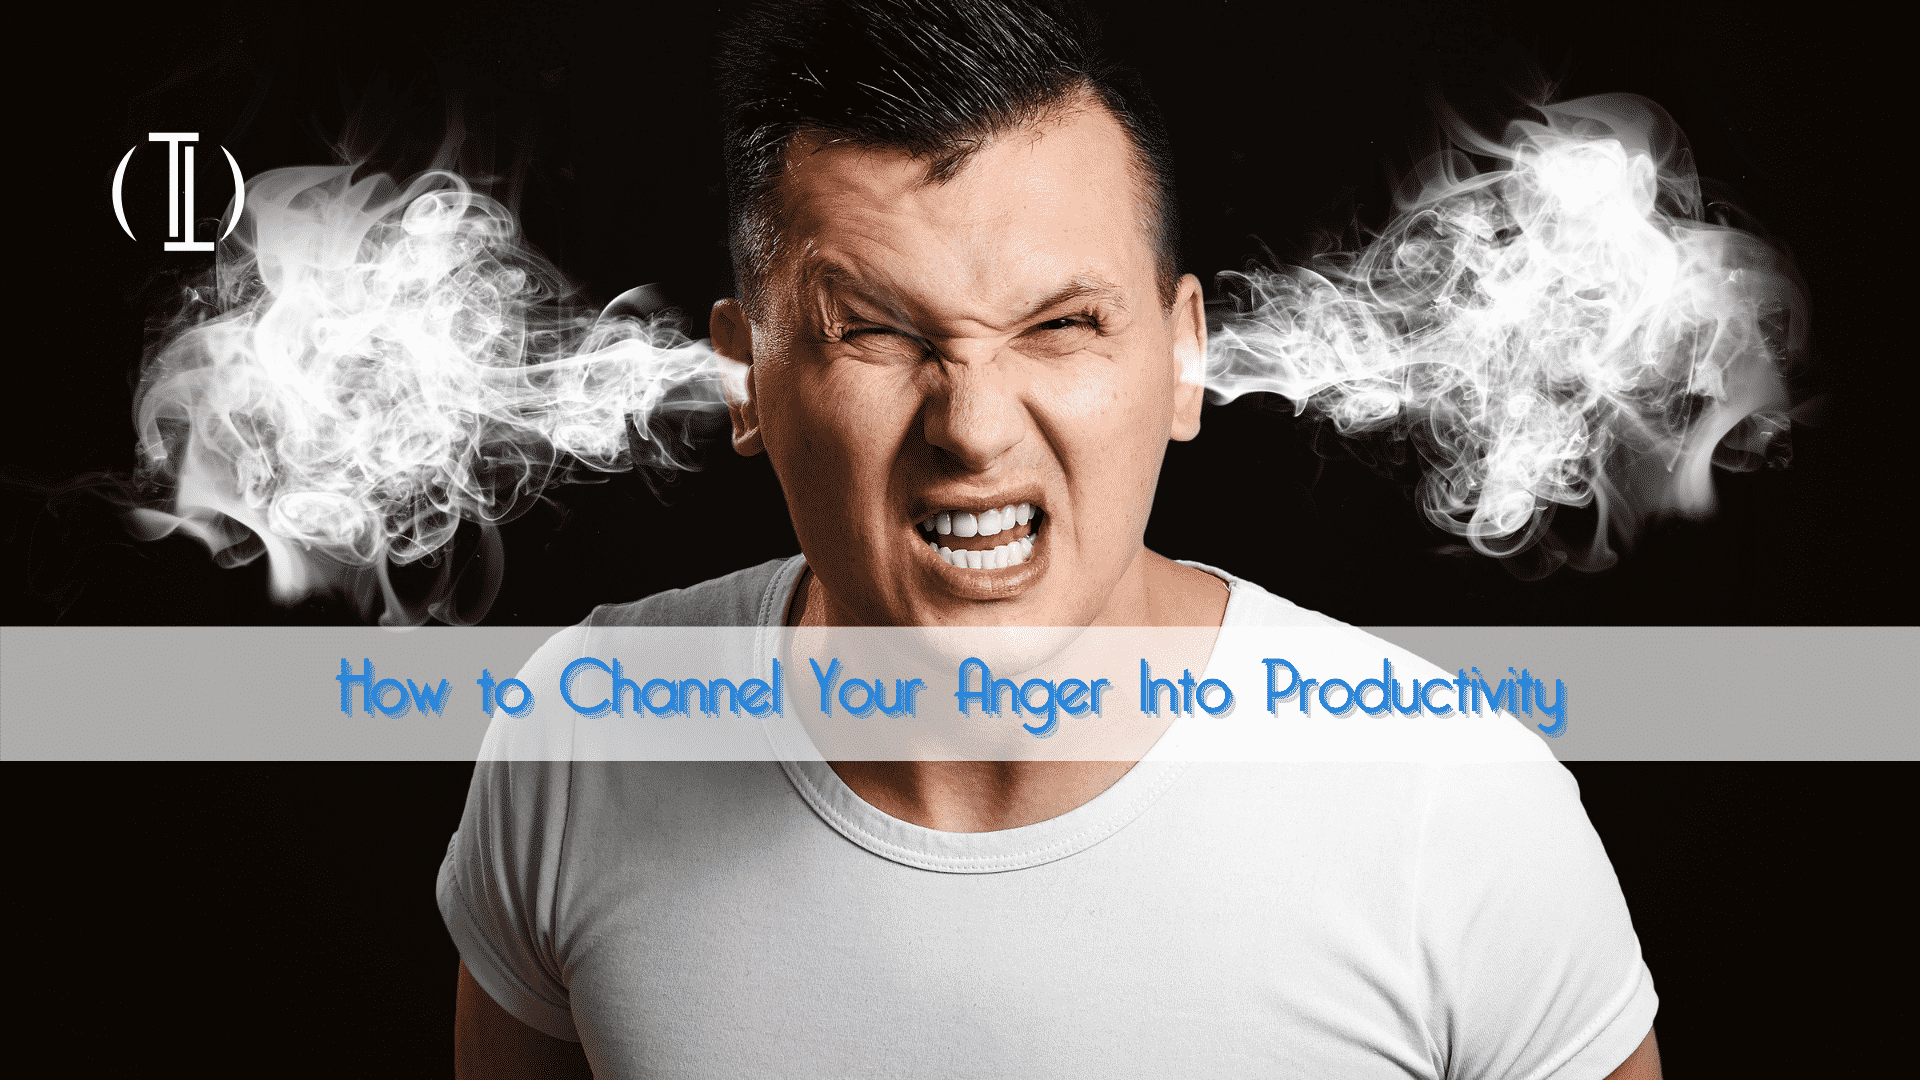 How to Channel Your Anger Into Productivity